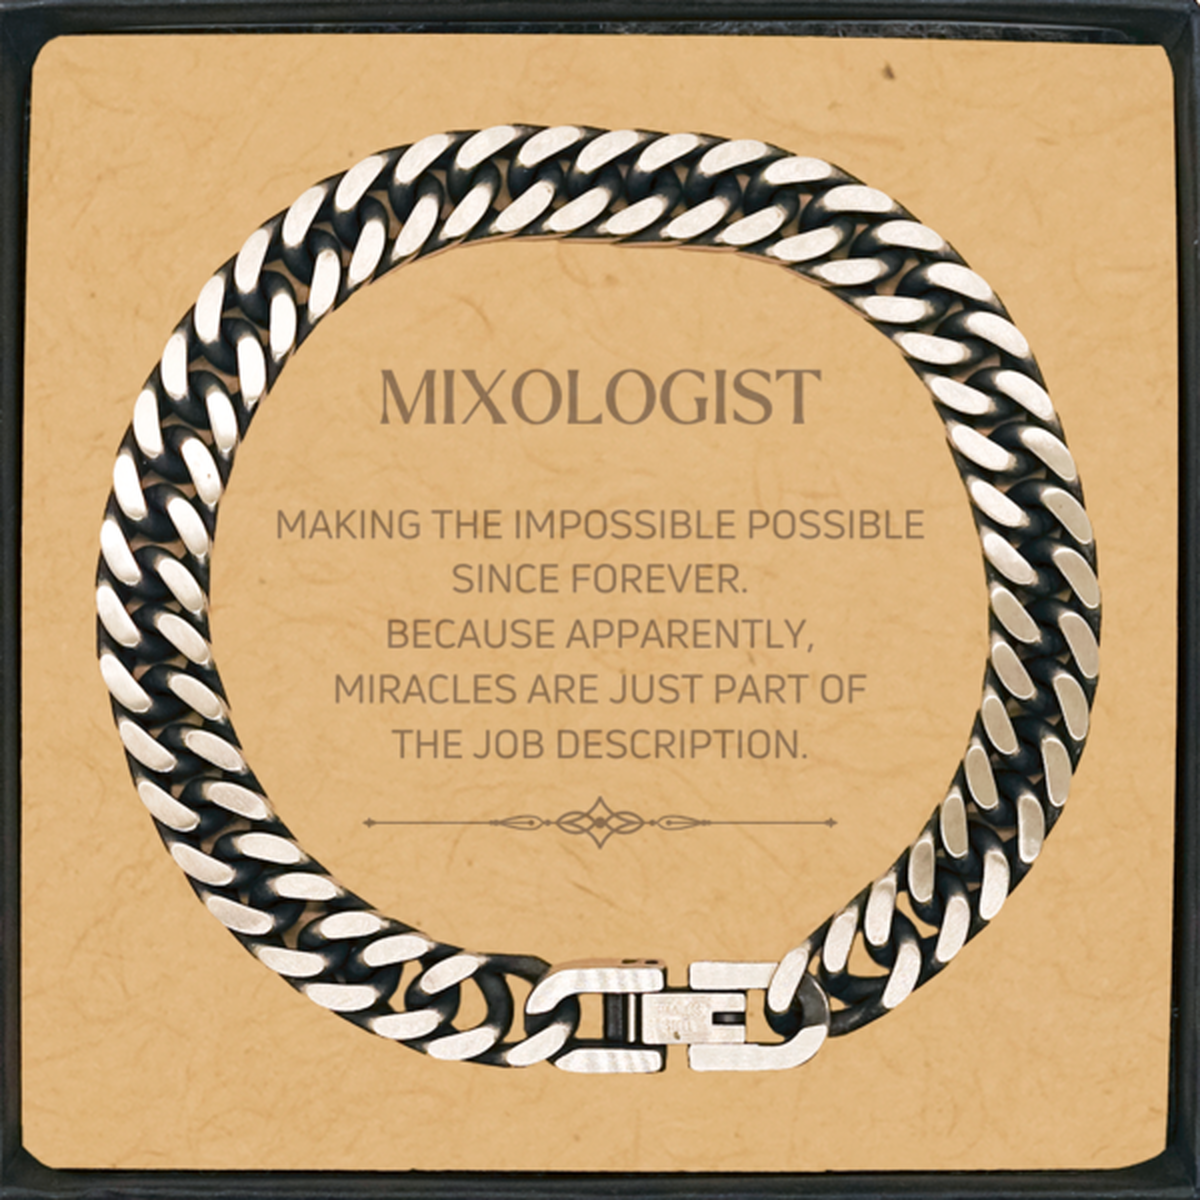 Funny Mixologist Gifts, Miracles are just part of the job description, Inspirational Birthday Cuban Link Chain Bracelet For Mixologist, Men, Women, Coworkers, Friends, Boss